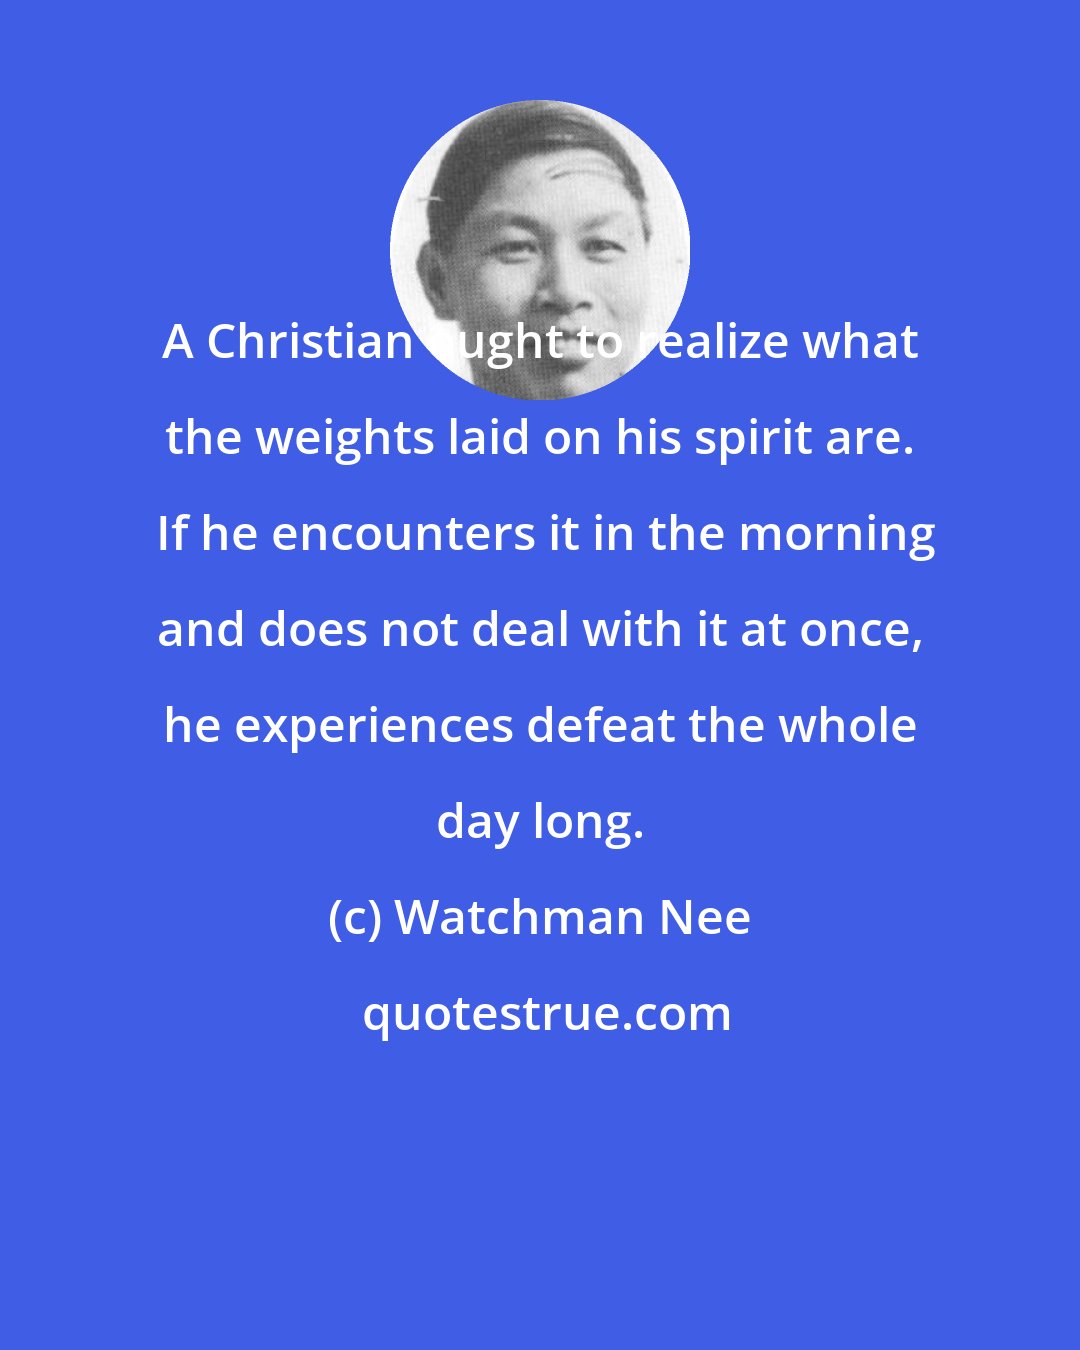 Watchman Nee: A Christian ought to realize what the weights laid on his spirit are.  If he encounters it in the morning and does not deal with it at once, he experiences defeat the whole day long.